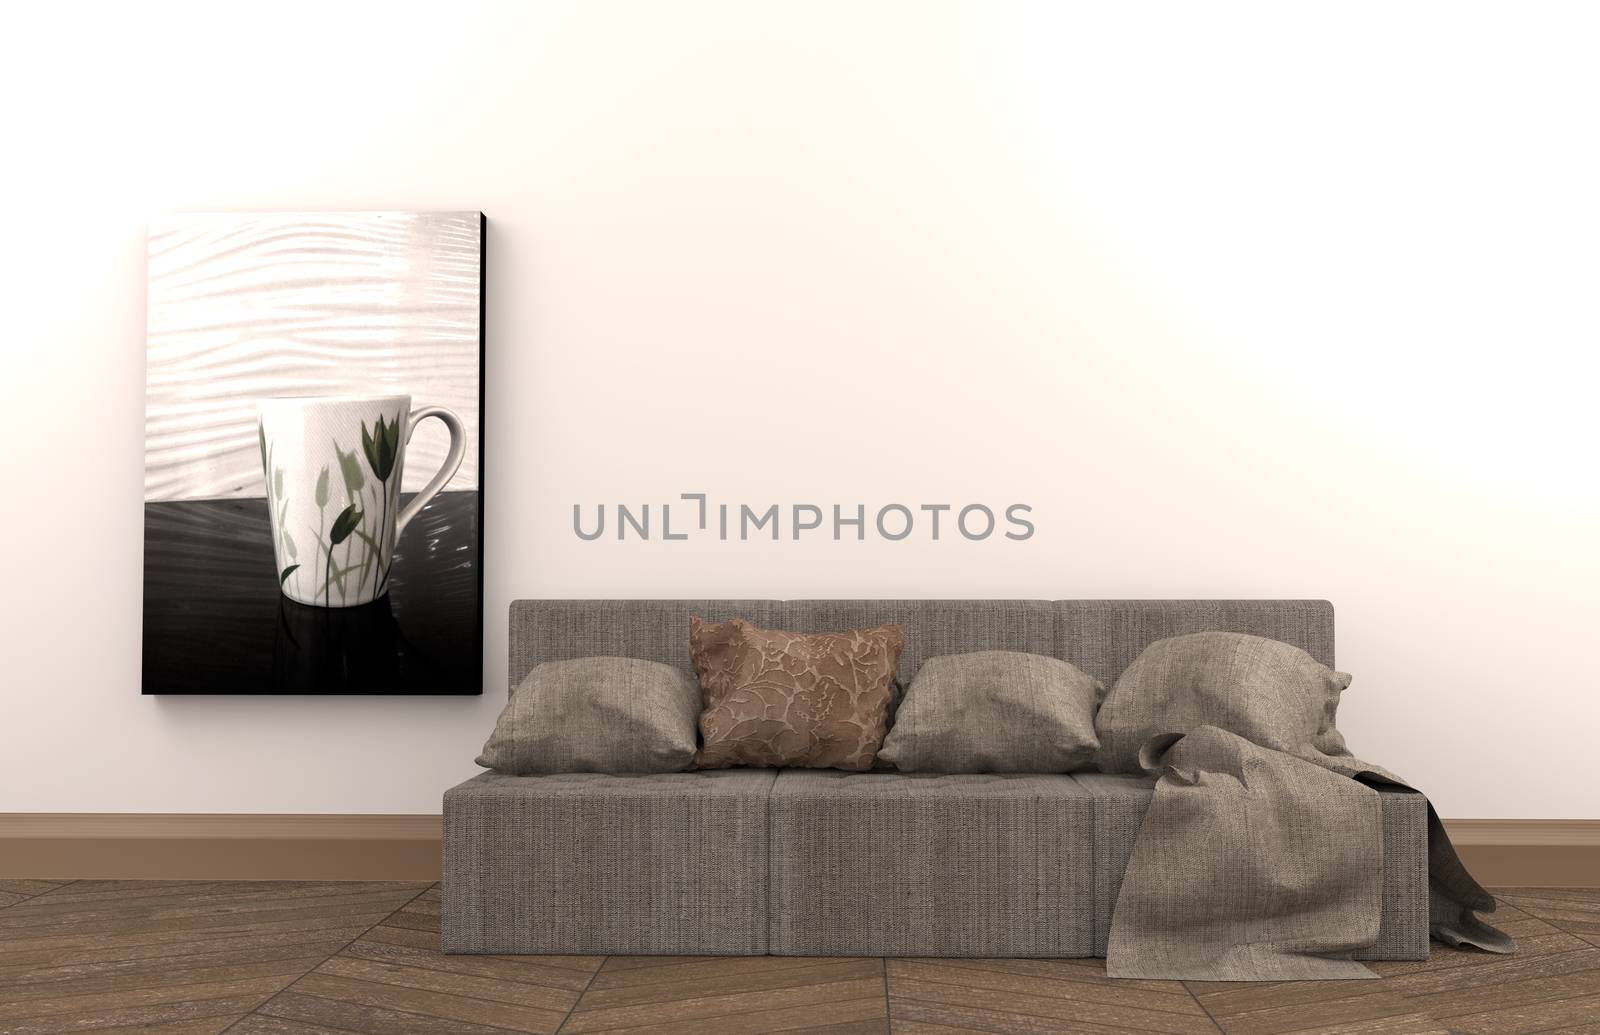 The interior has a sofa and frame on empty white wall background by Minny0012011@hotmail.com